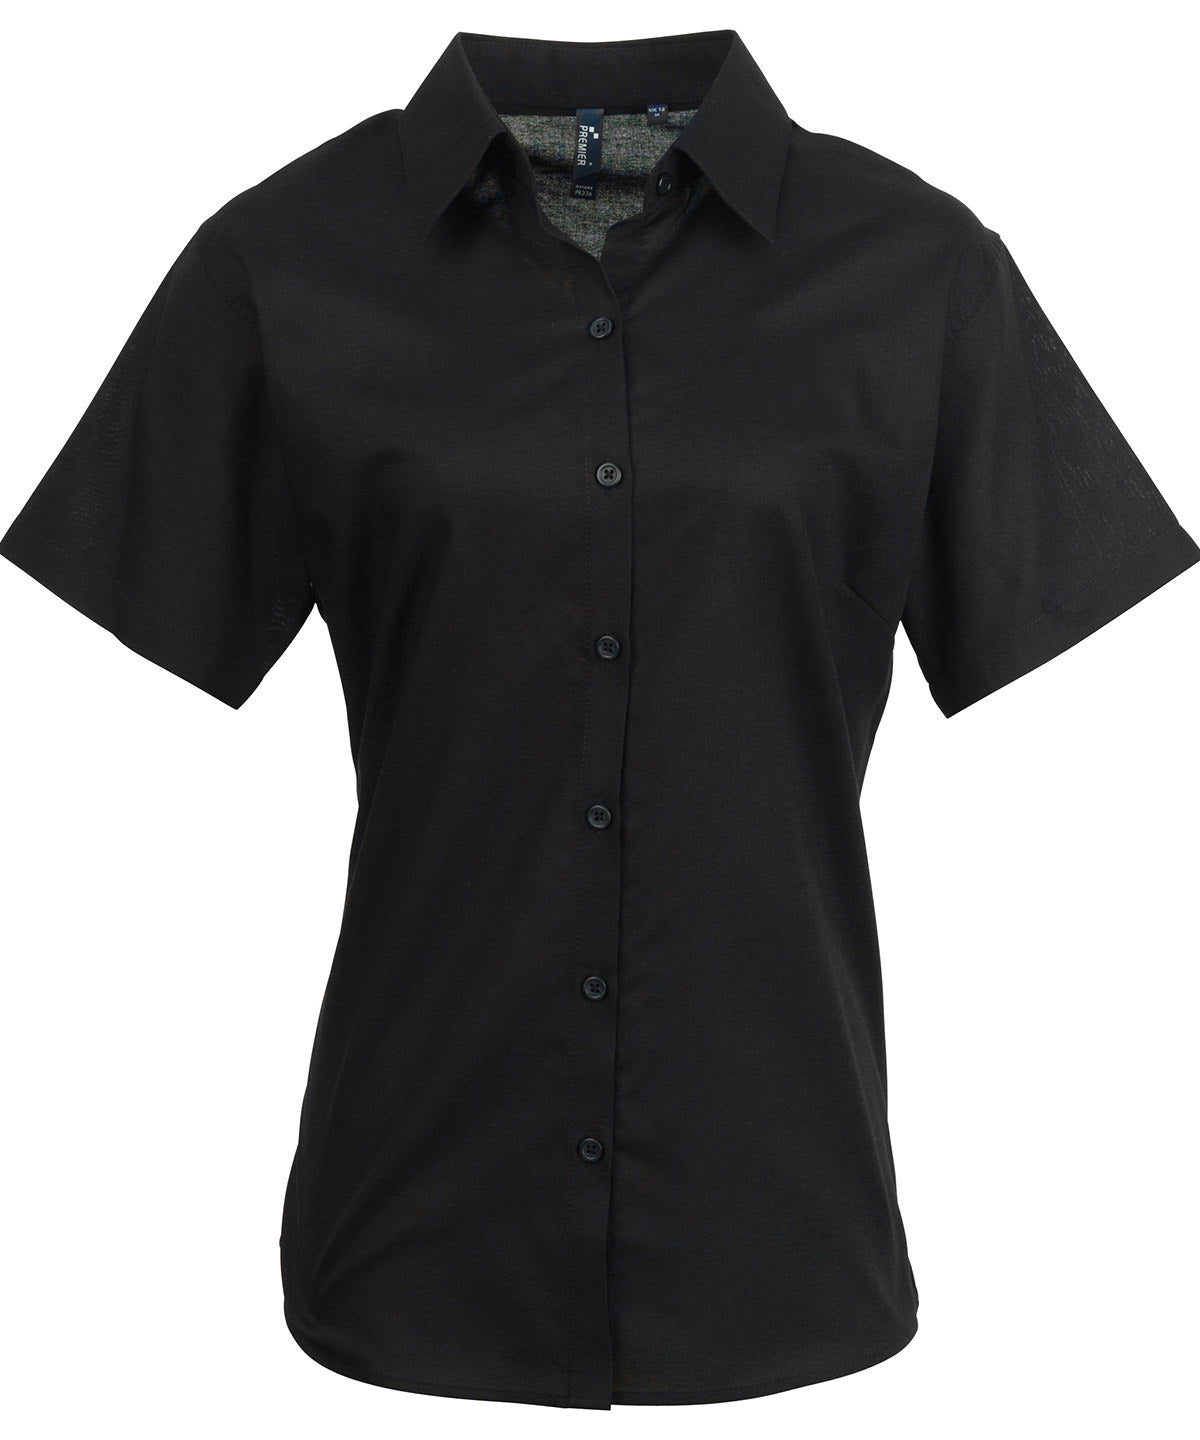 LADIES SIGNATURE OXFORD SHORT SLEEVE BLOUSE - COOZO